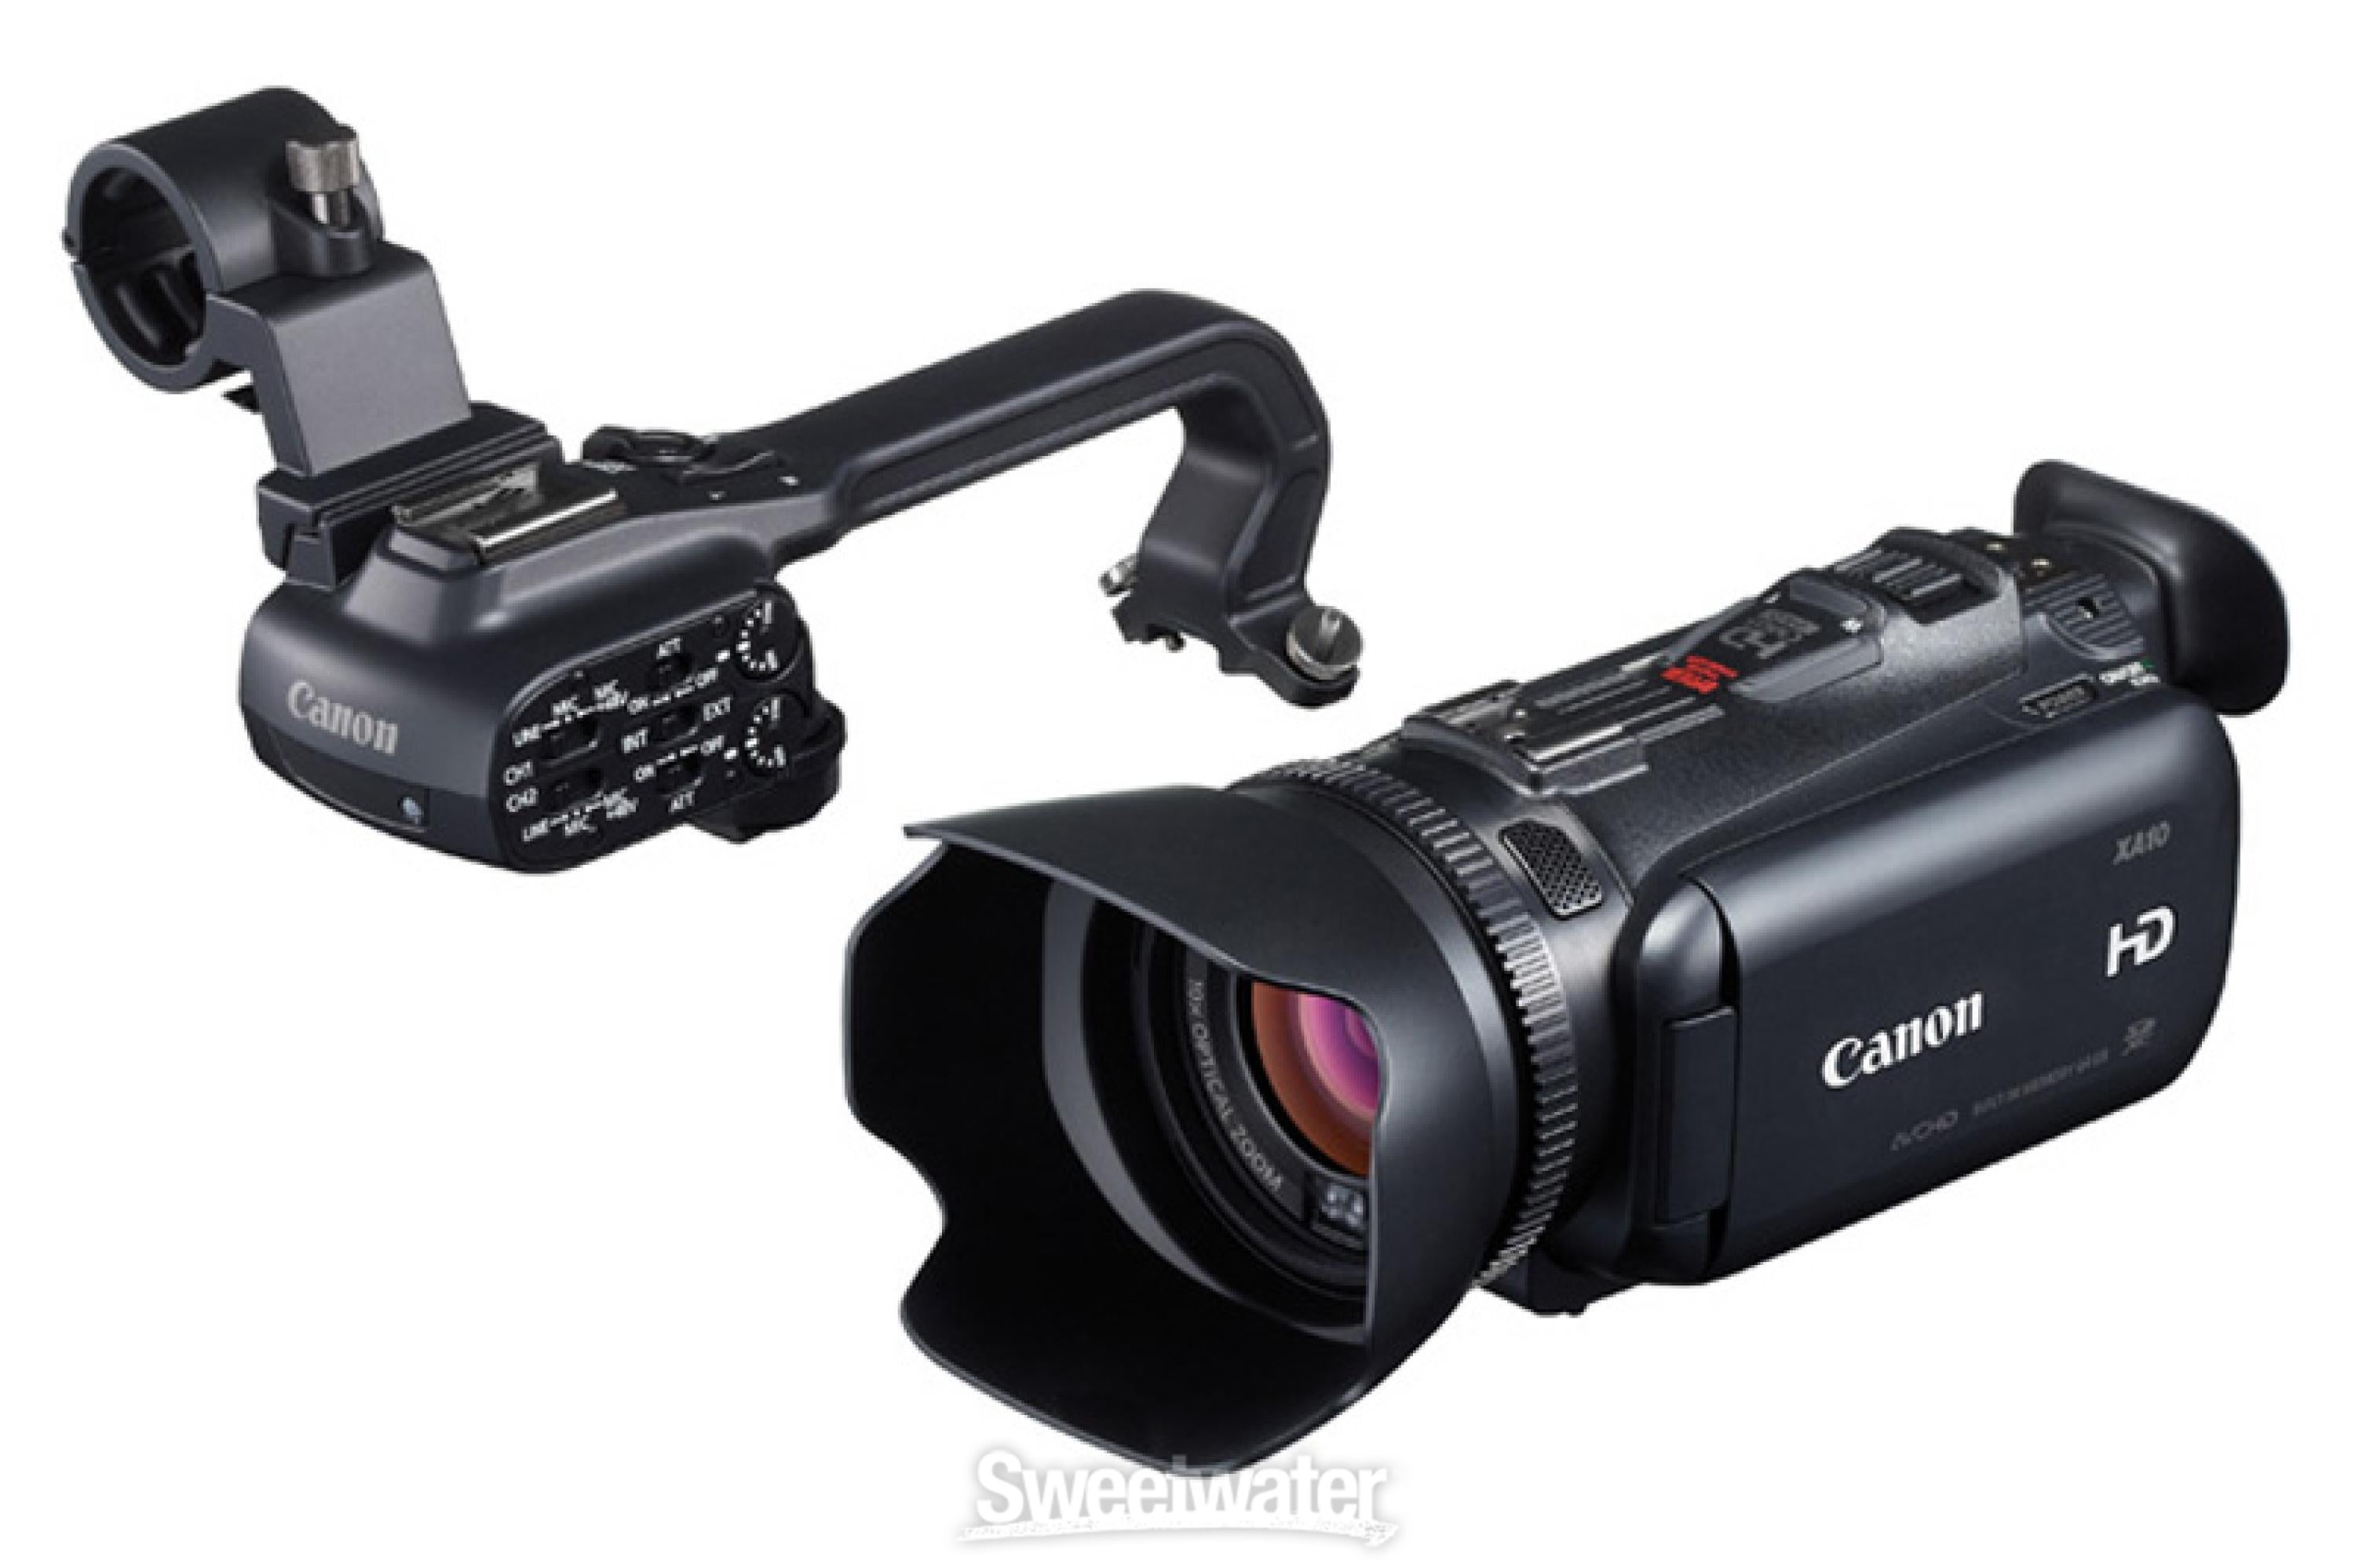 Canon XA10 HD Camcorder | Sweetwater